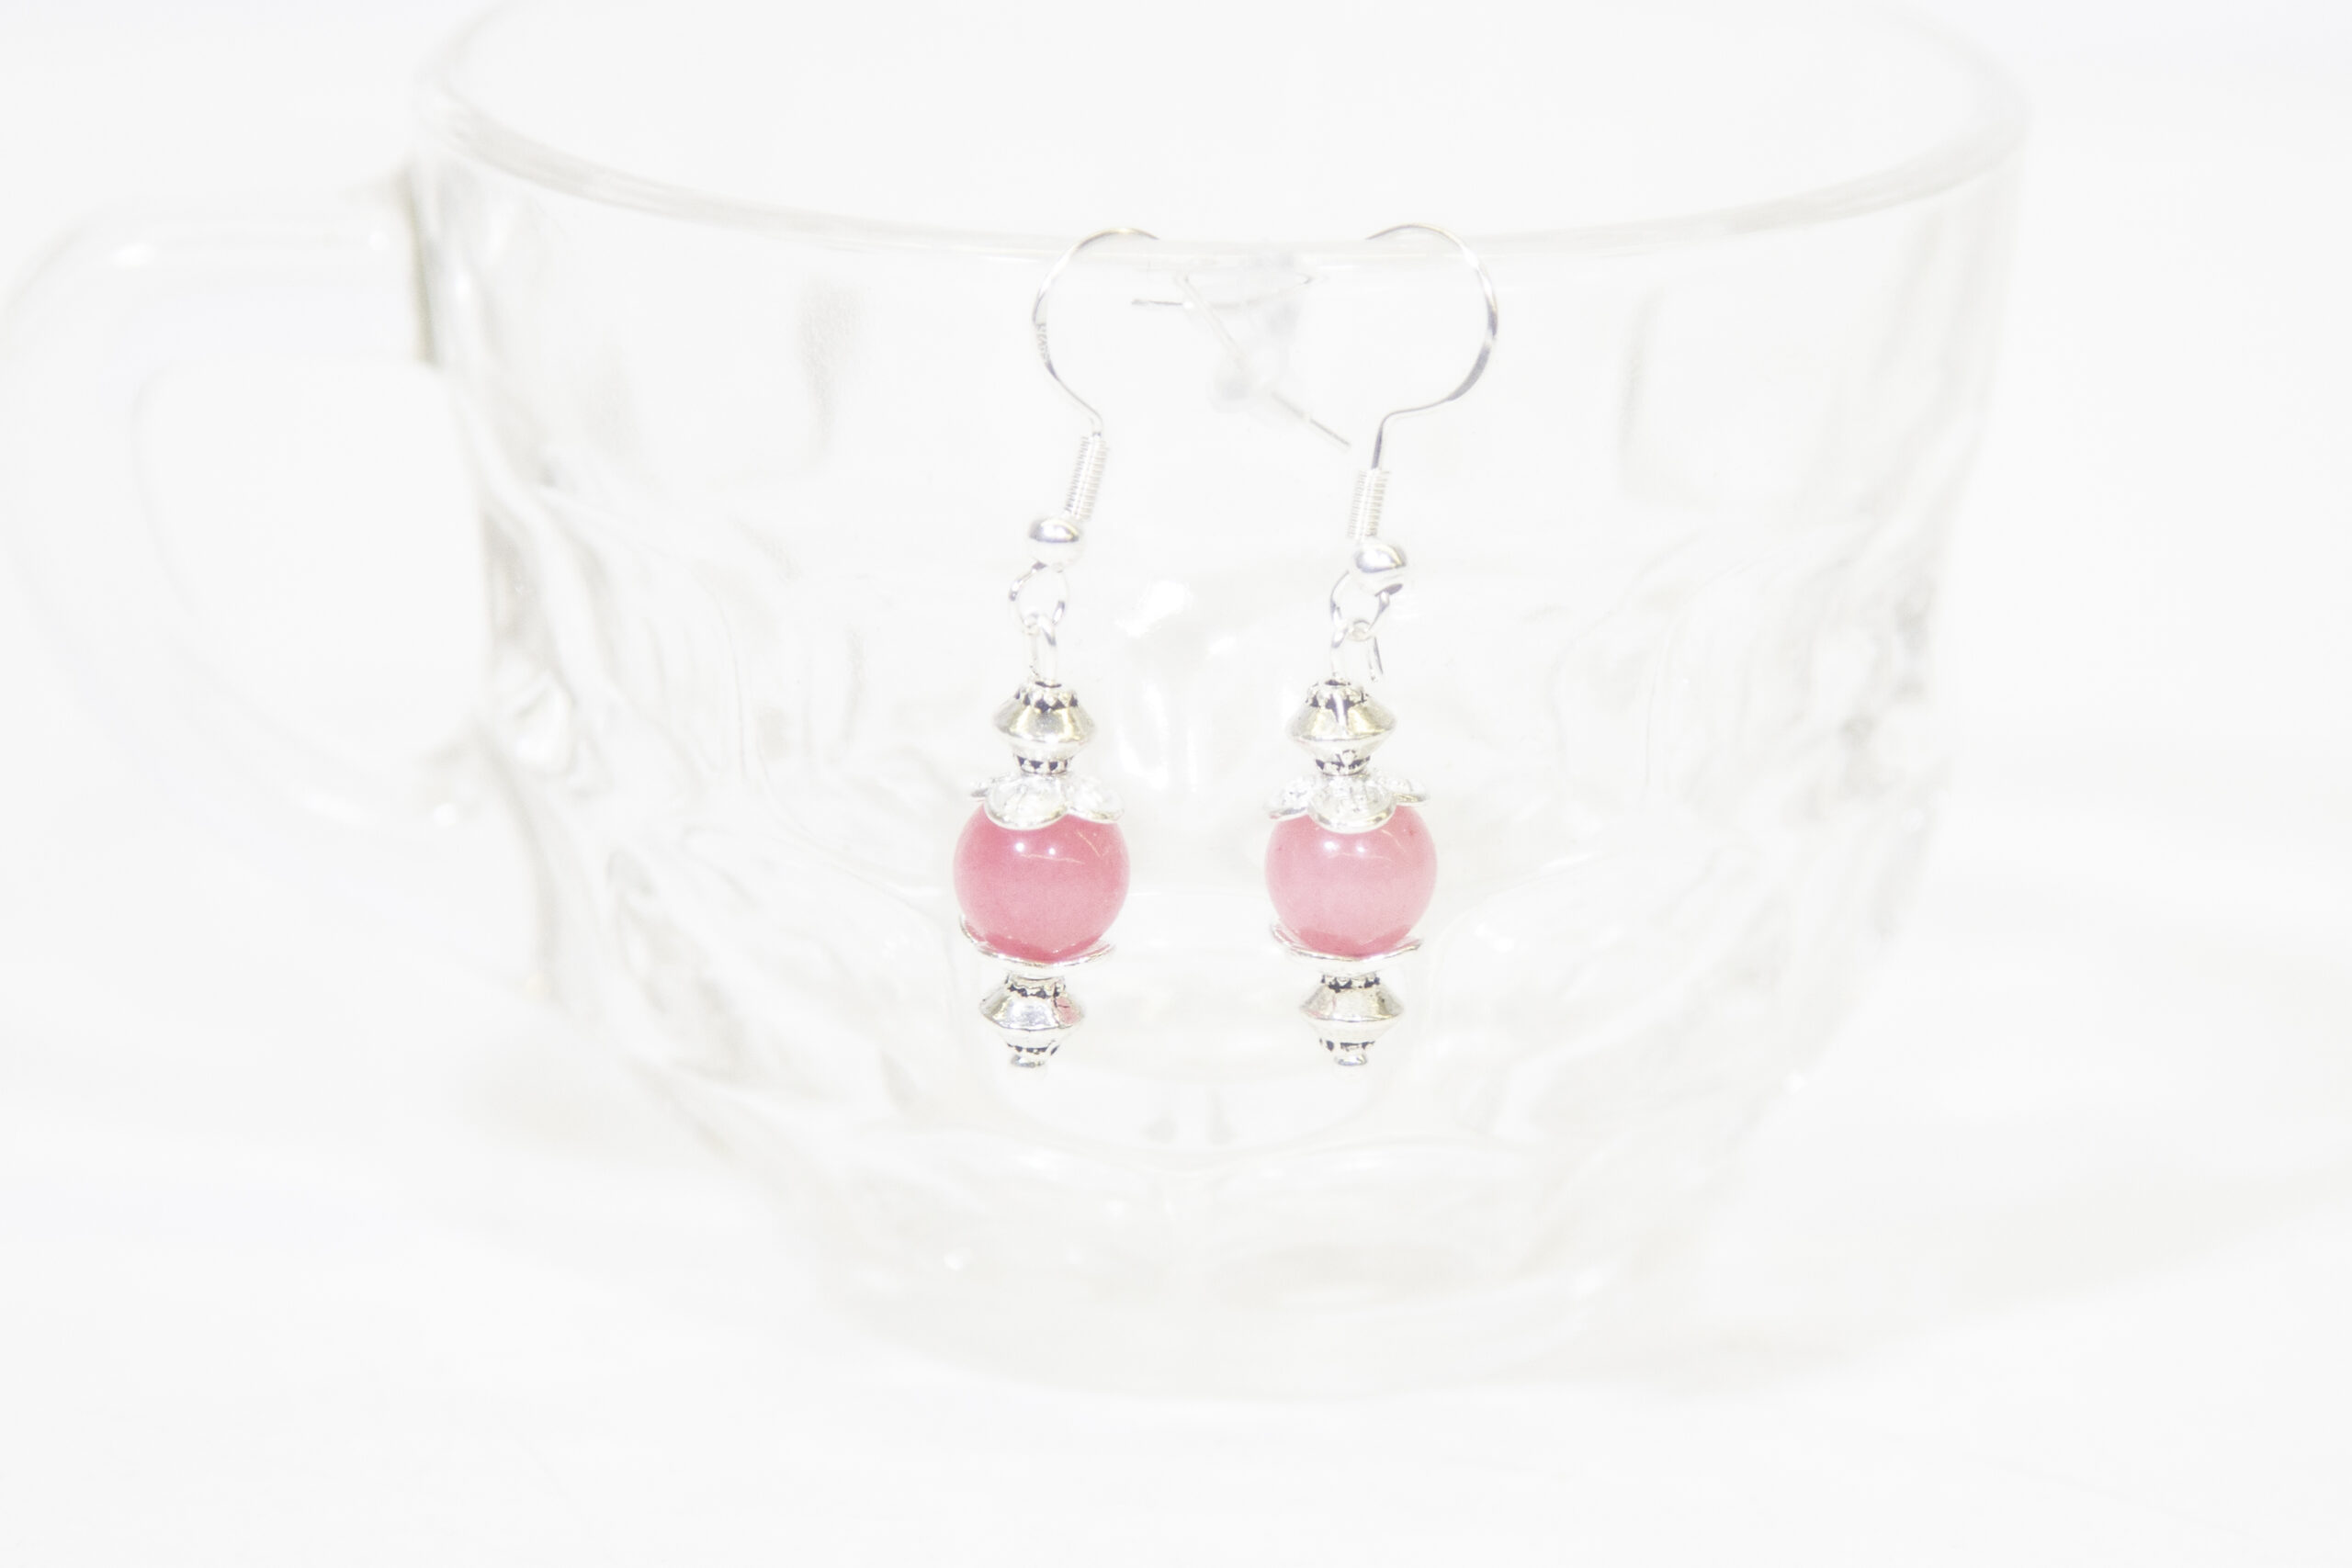 Rose Quartz Earrings Hanging on side of glass cup